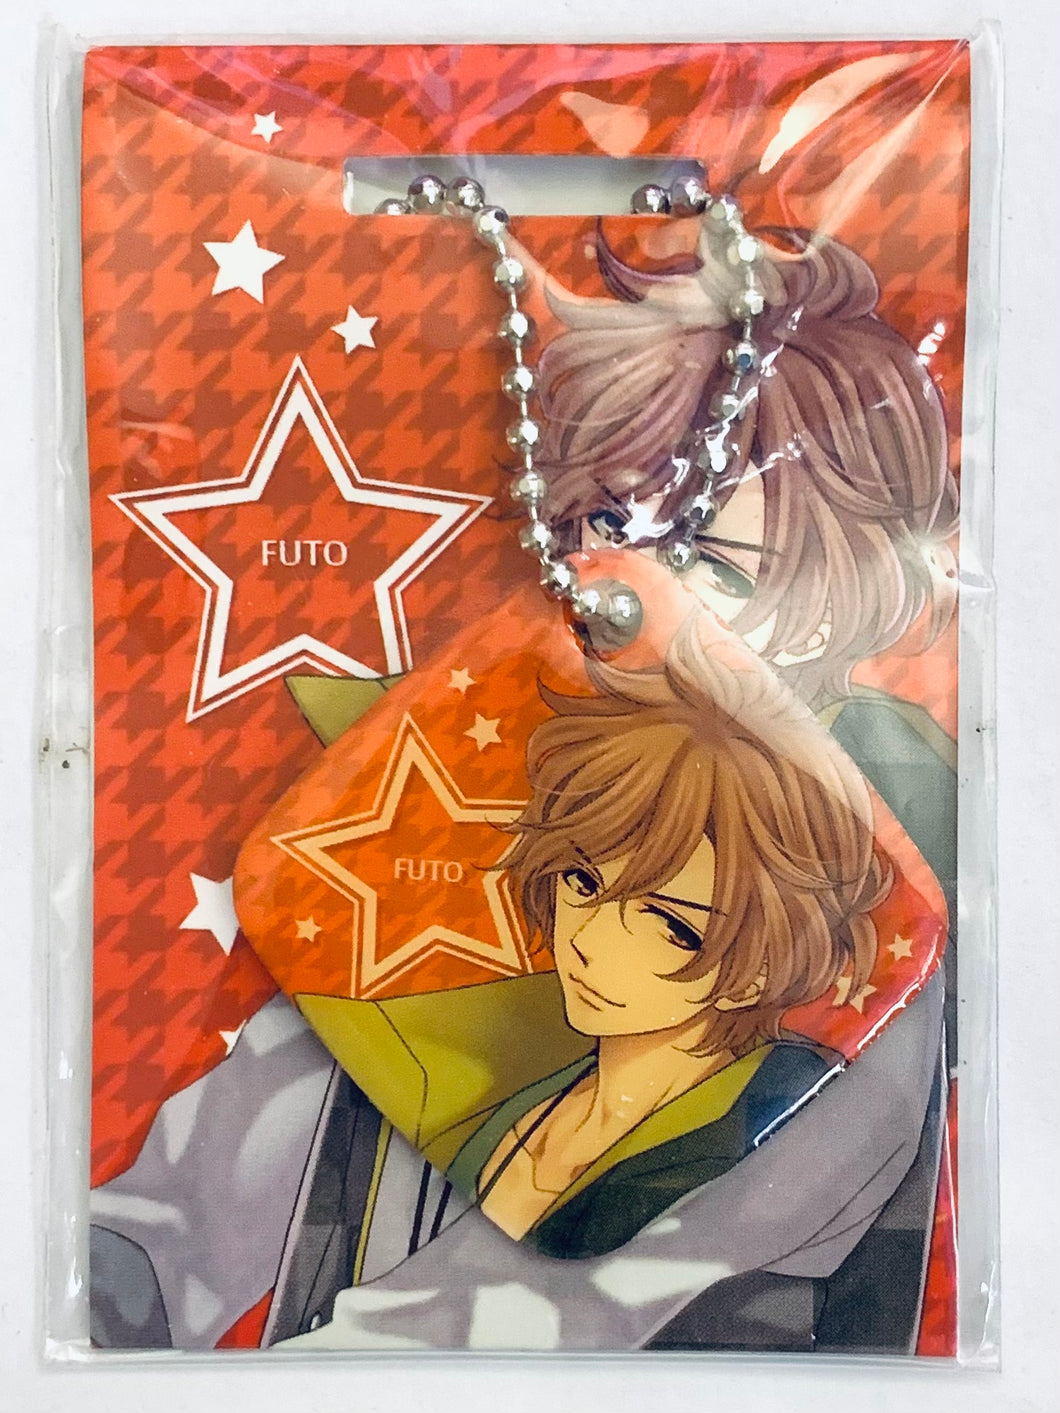 Brothers Conflict - Asahina Fuuto - Metal Plate - Charm